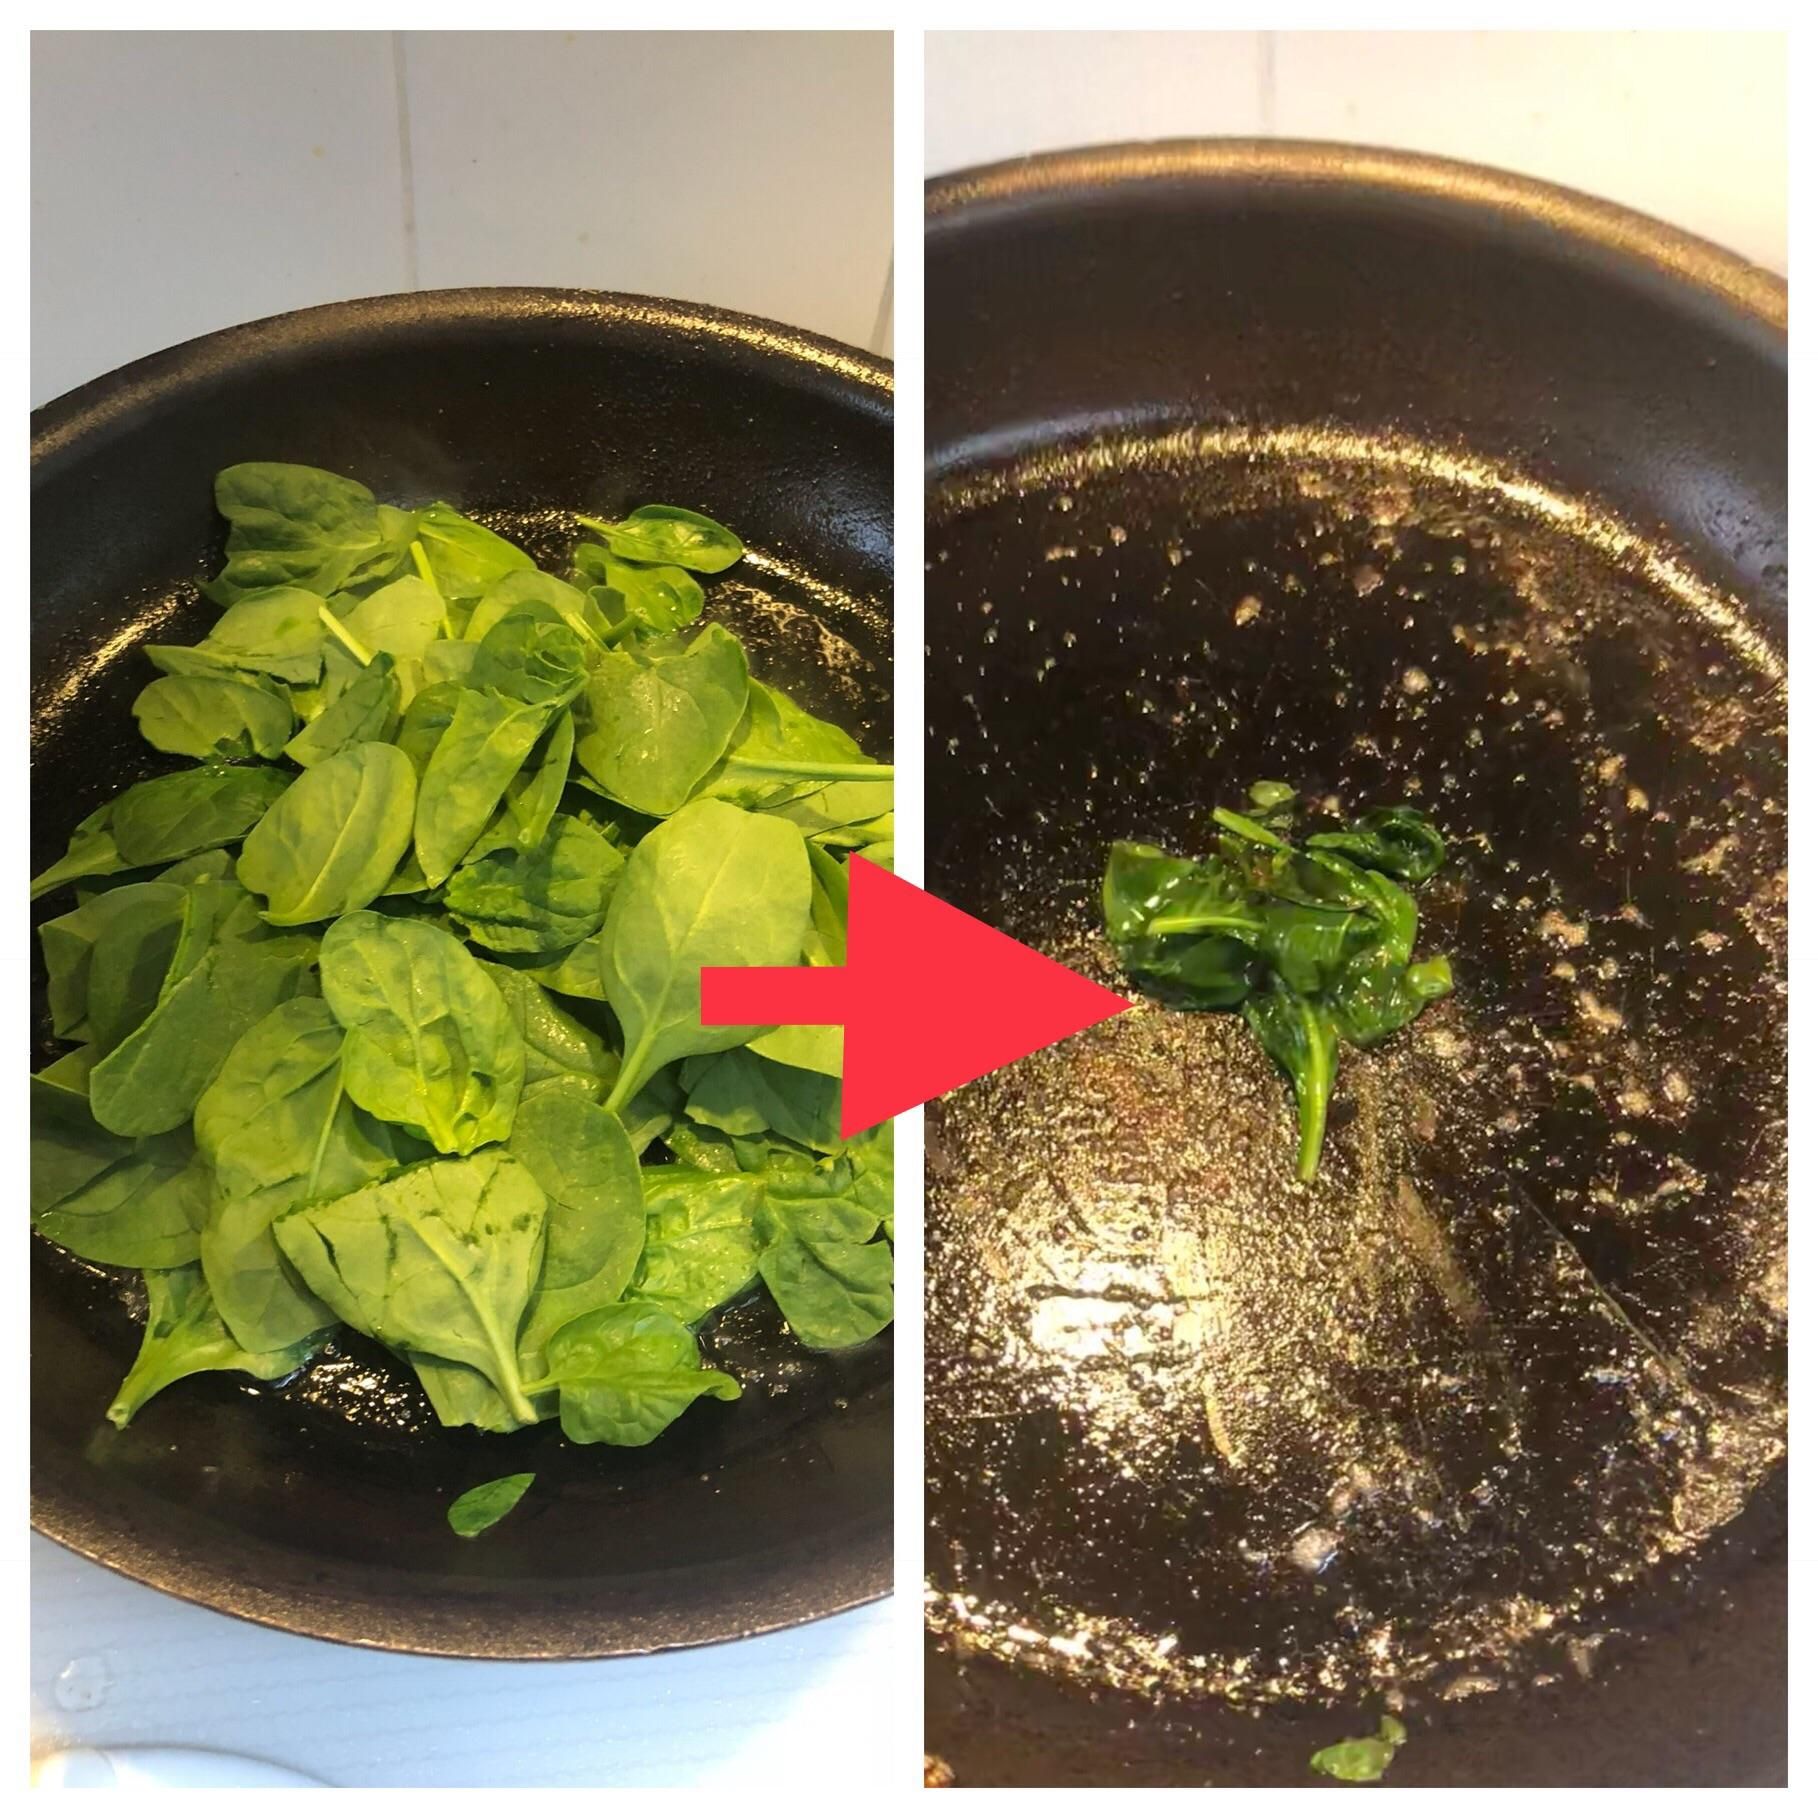 Before and after Sautéing spinach